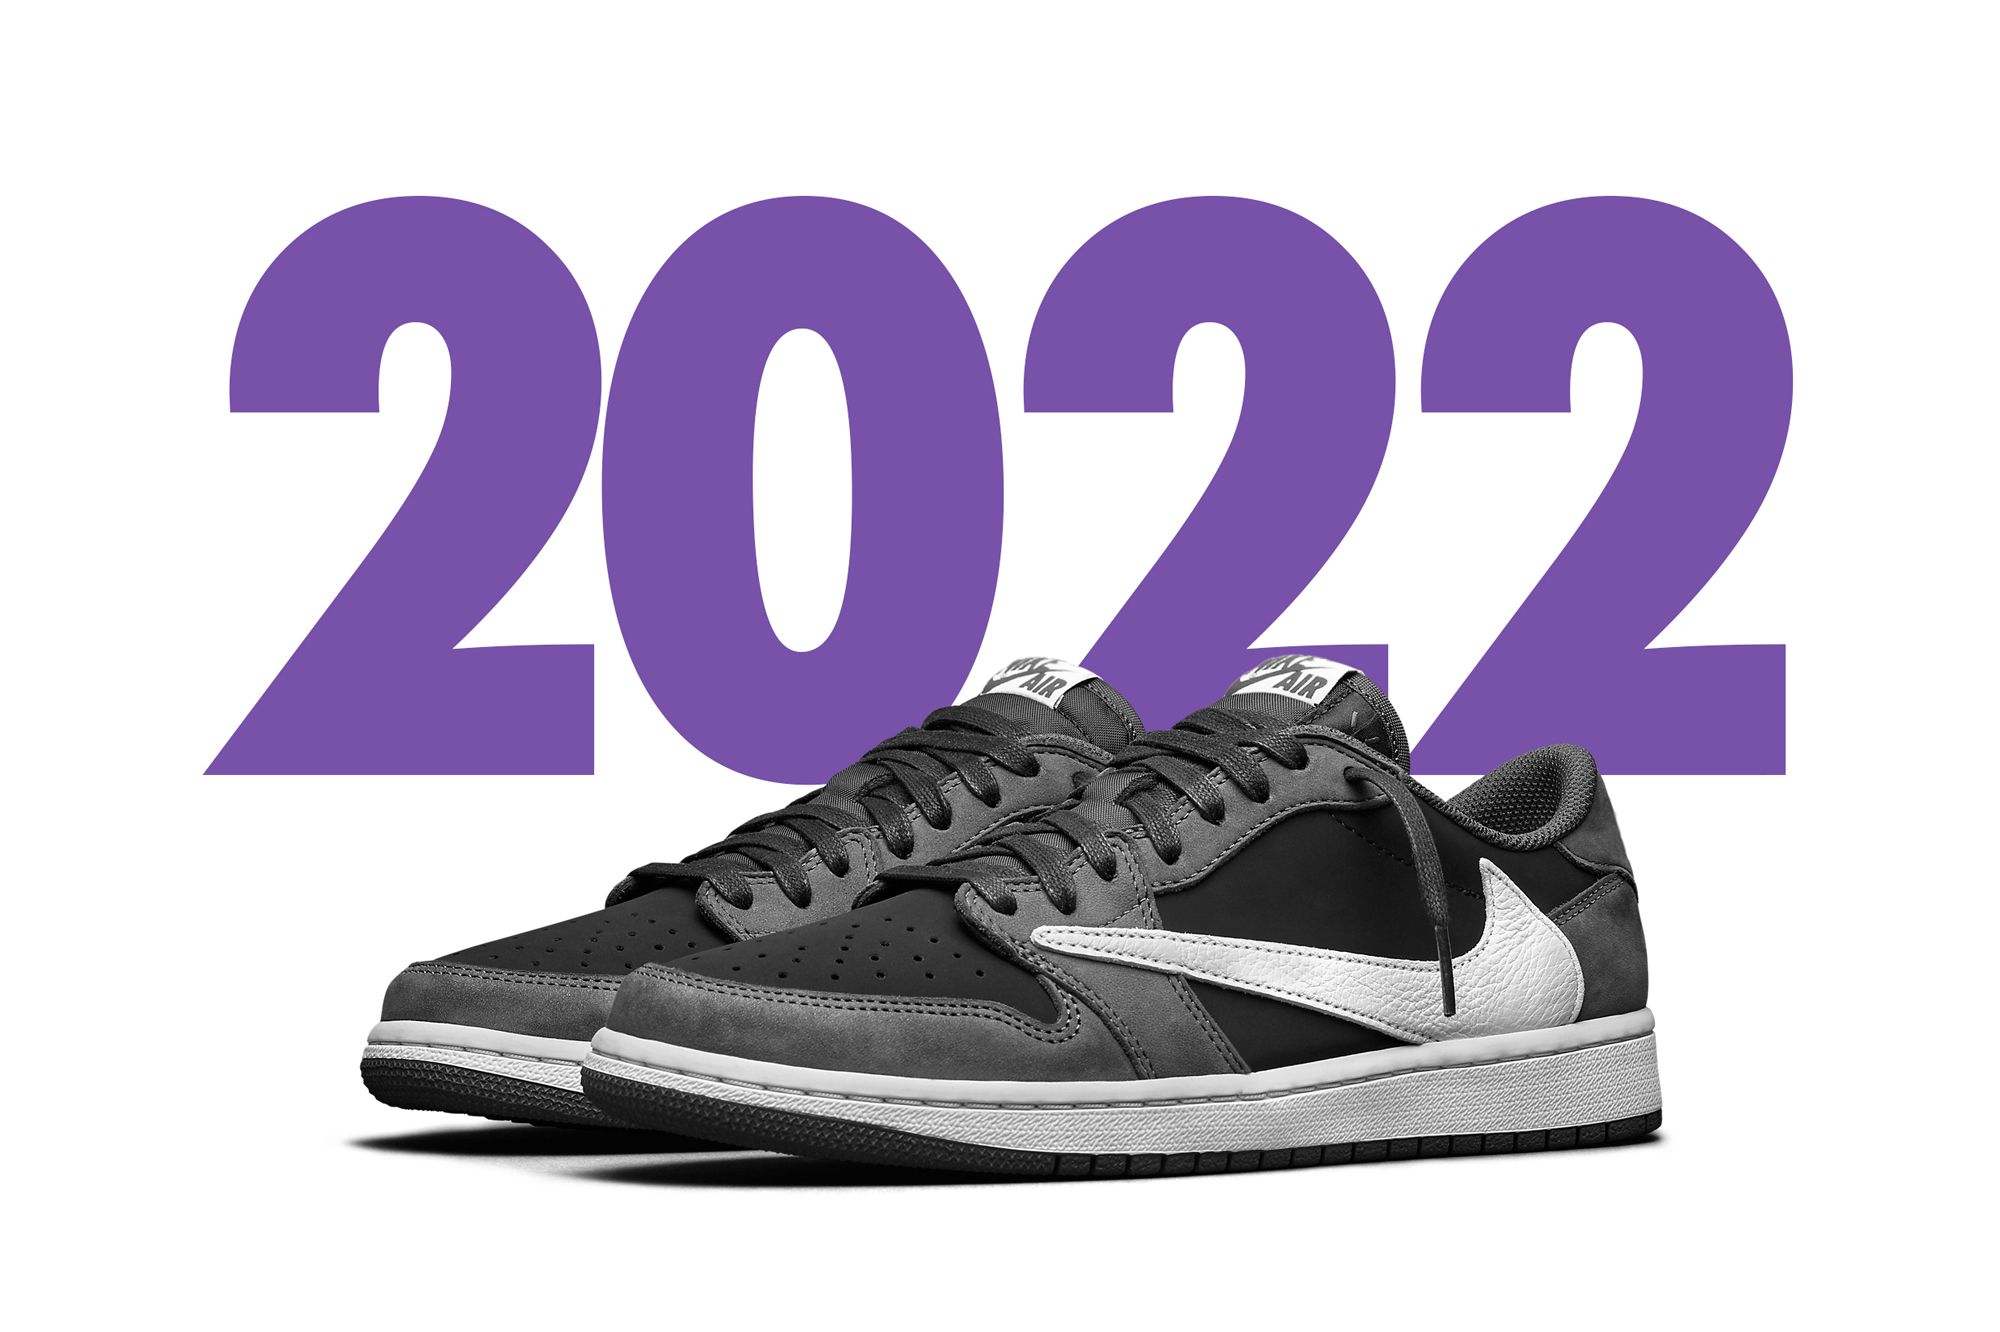 Sneakers We're Already Looking Forward To in 2022